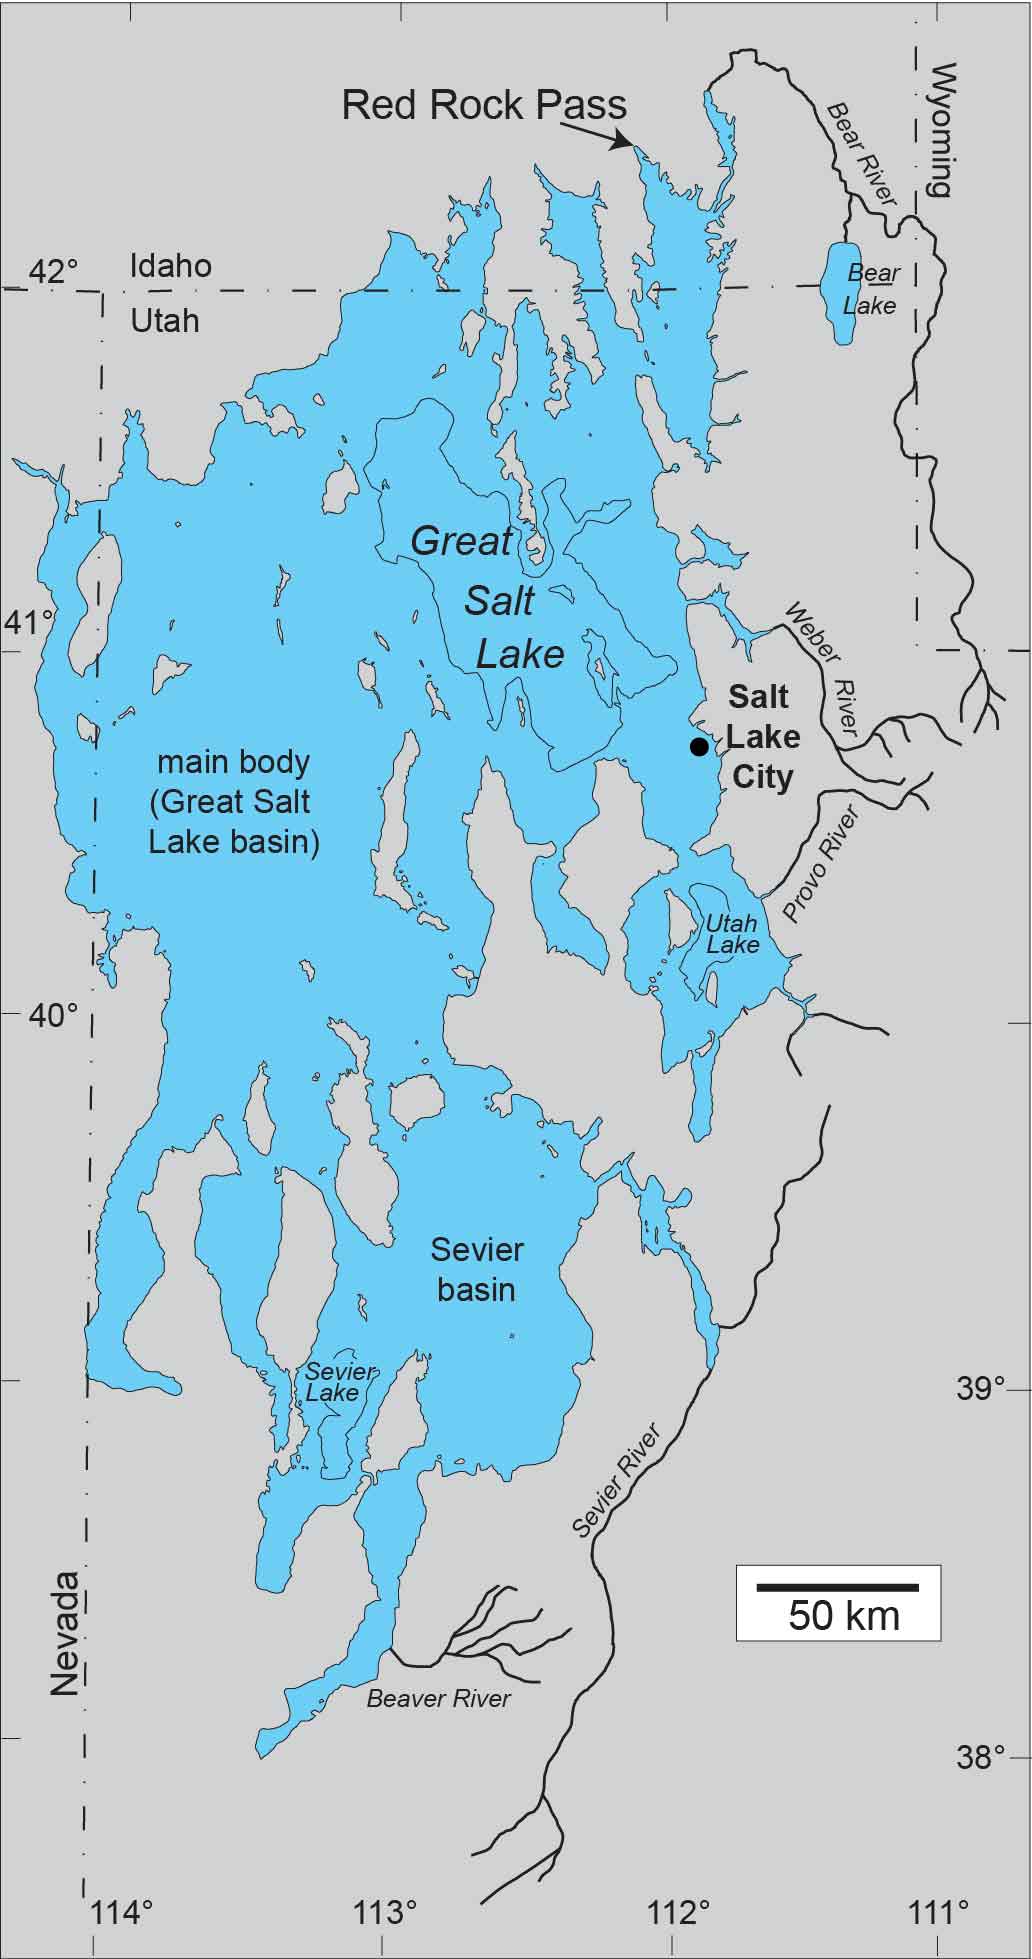 Map of Lake Bonneville in northwestern Utah; the modern Great Salt Lake is outlined in the northern part of Lake Bonneville and is much smaller than Lake Bonneville.